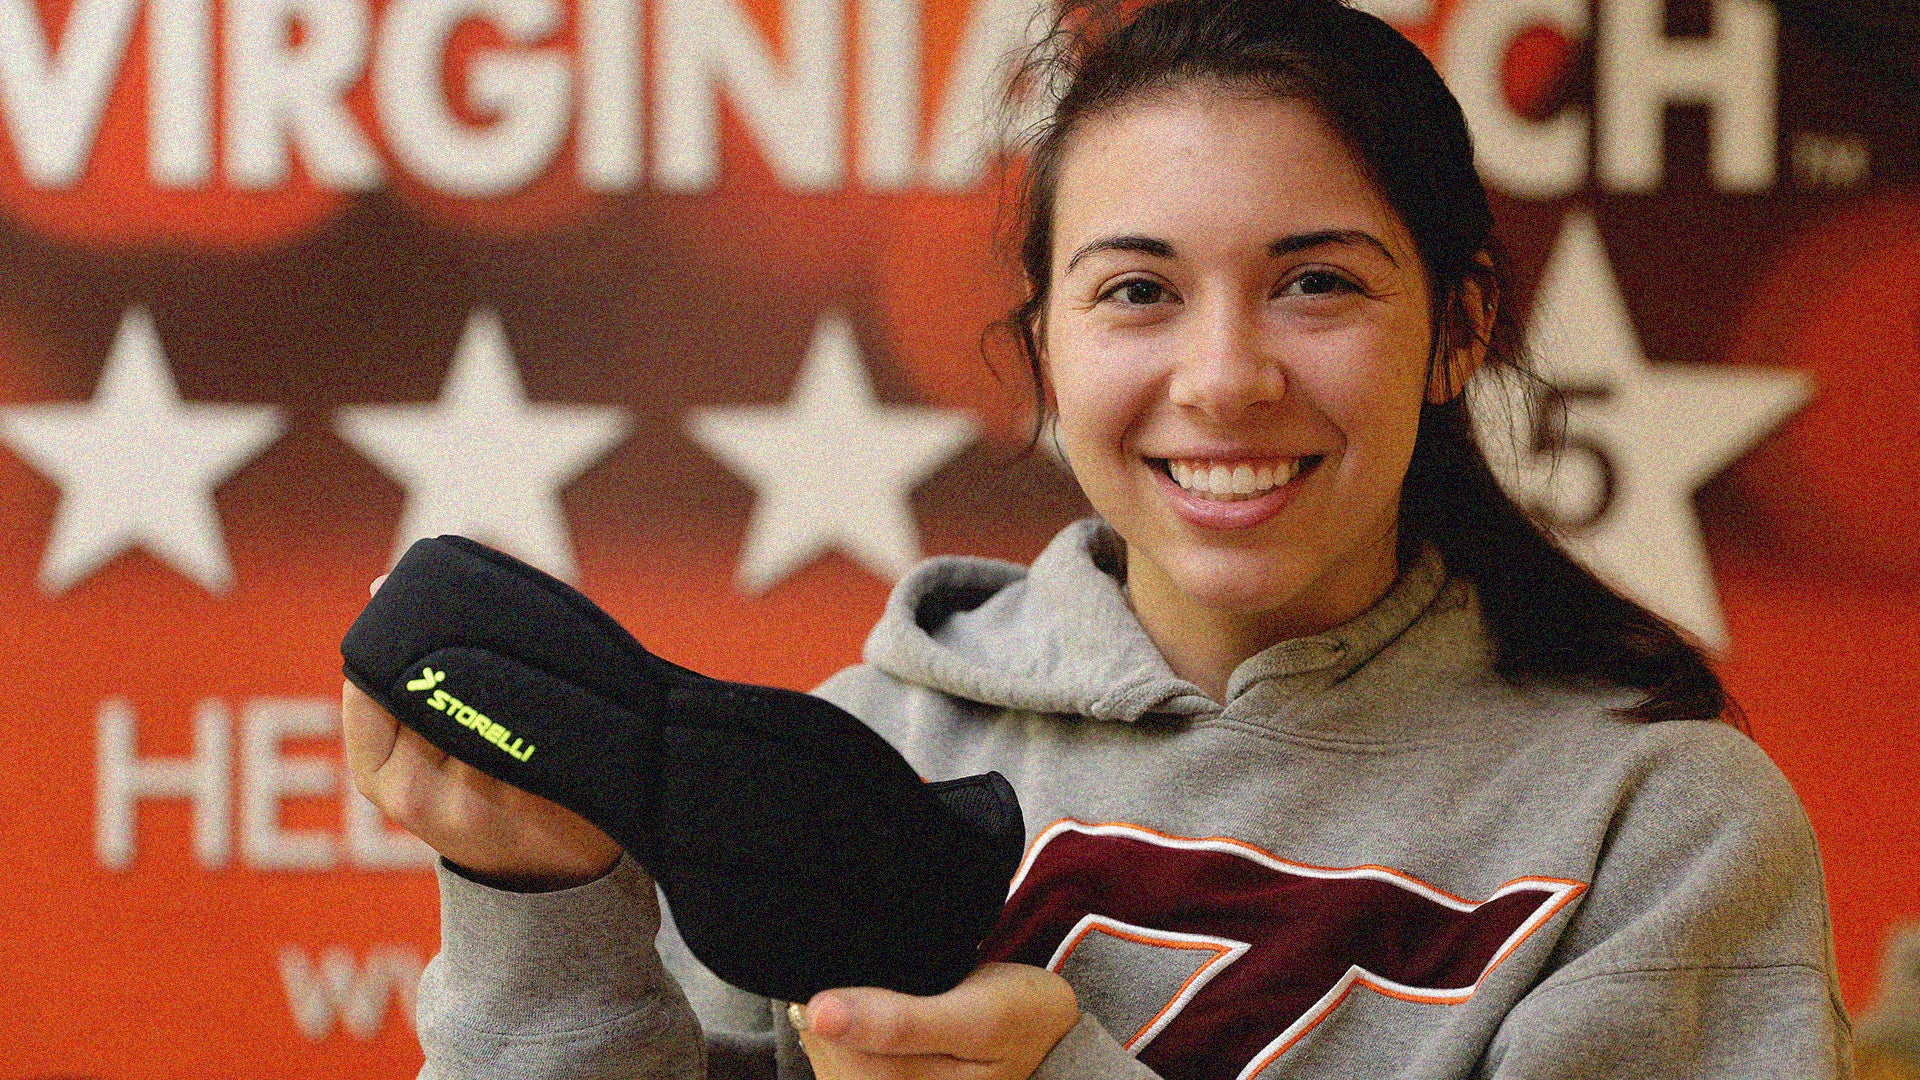 Storelli soccer headgear tested at Virginia Tech and ranked best of all, with 5 stars and 84% reduction in concussions